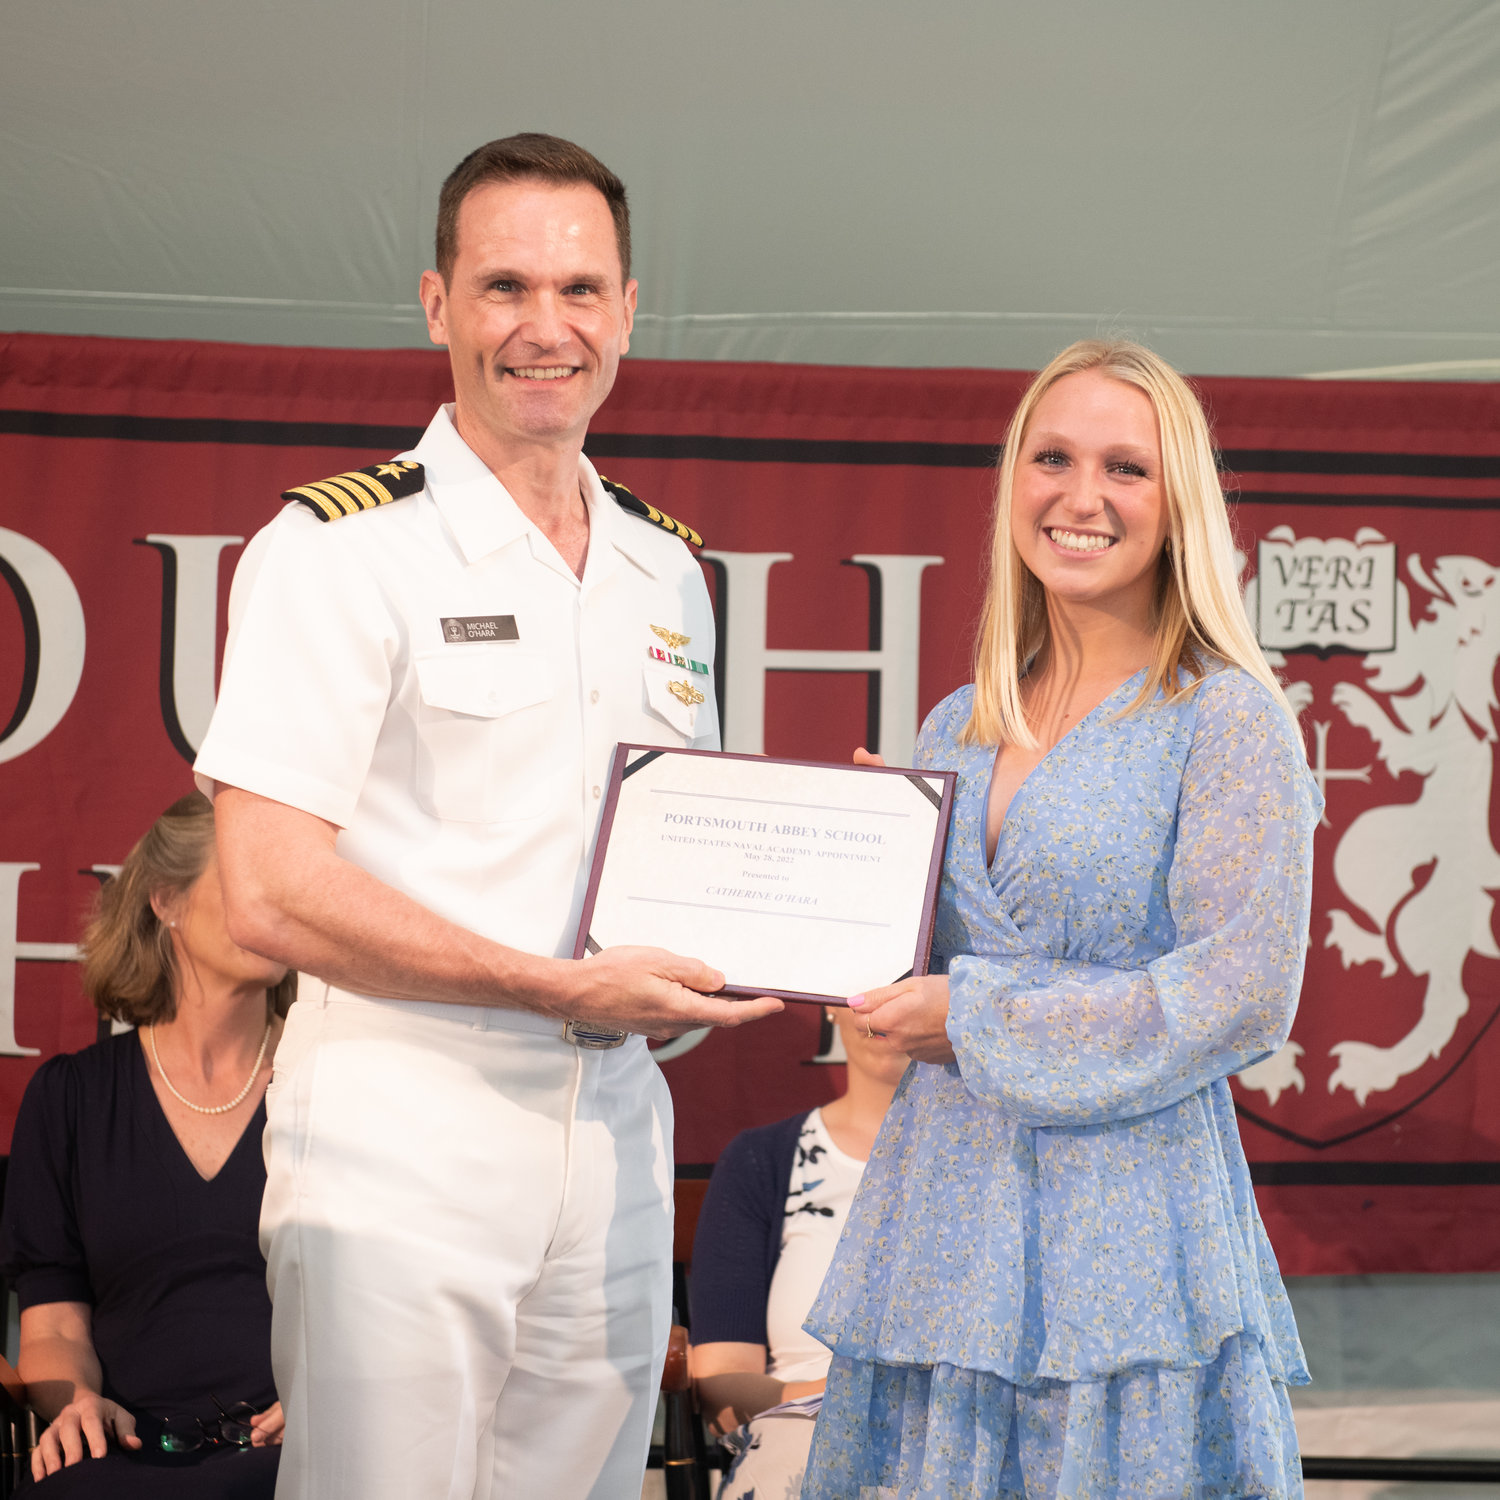 Portsmouth Abbey graduate Catherine (Lisie) O’Hara of Portsmouth received her official U.S. Naval Academy appointment, presented by her father, Blue and Gold Officer Capt. Michael O’Hara, a permanent military professor and chair of the Wargaming Department at the U.S. Naval War College. Lisie was also elected by her classmates to give one of the commencement speeches during the graduation ceremony.